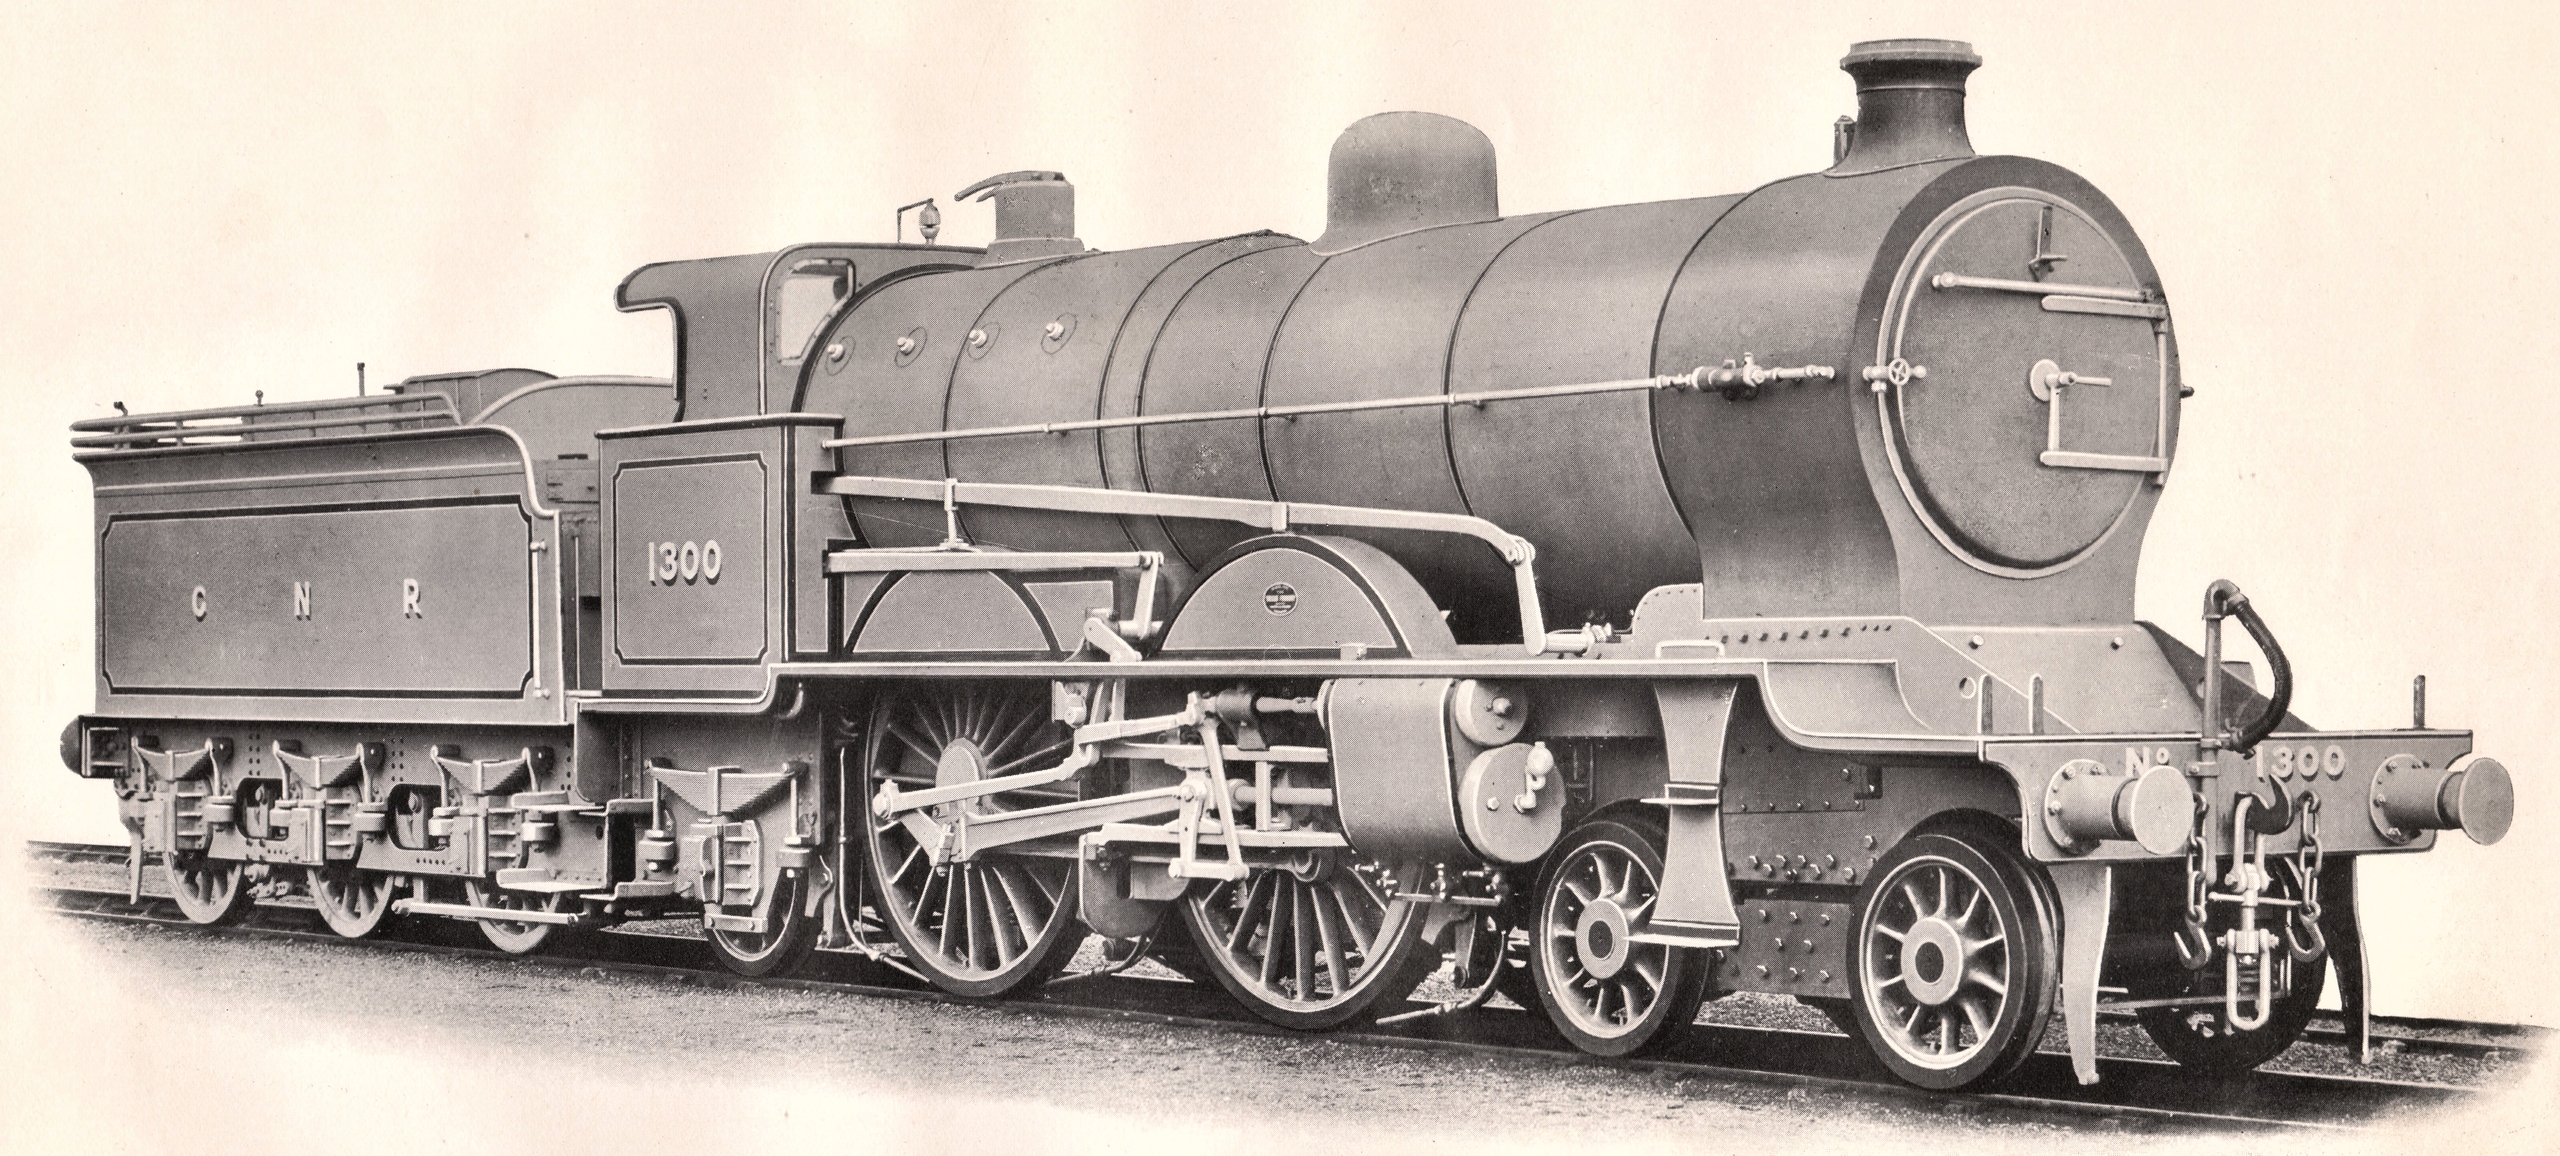 No. 1421 with four-cylinder compound engine